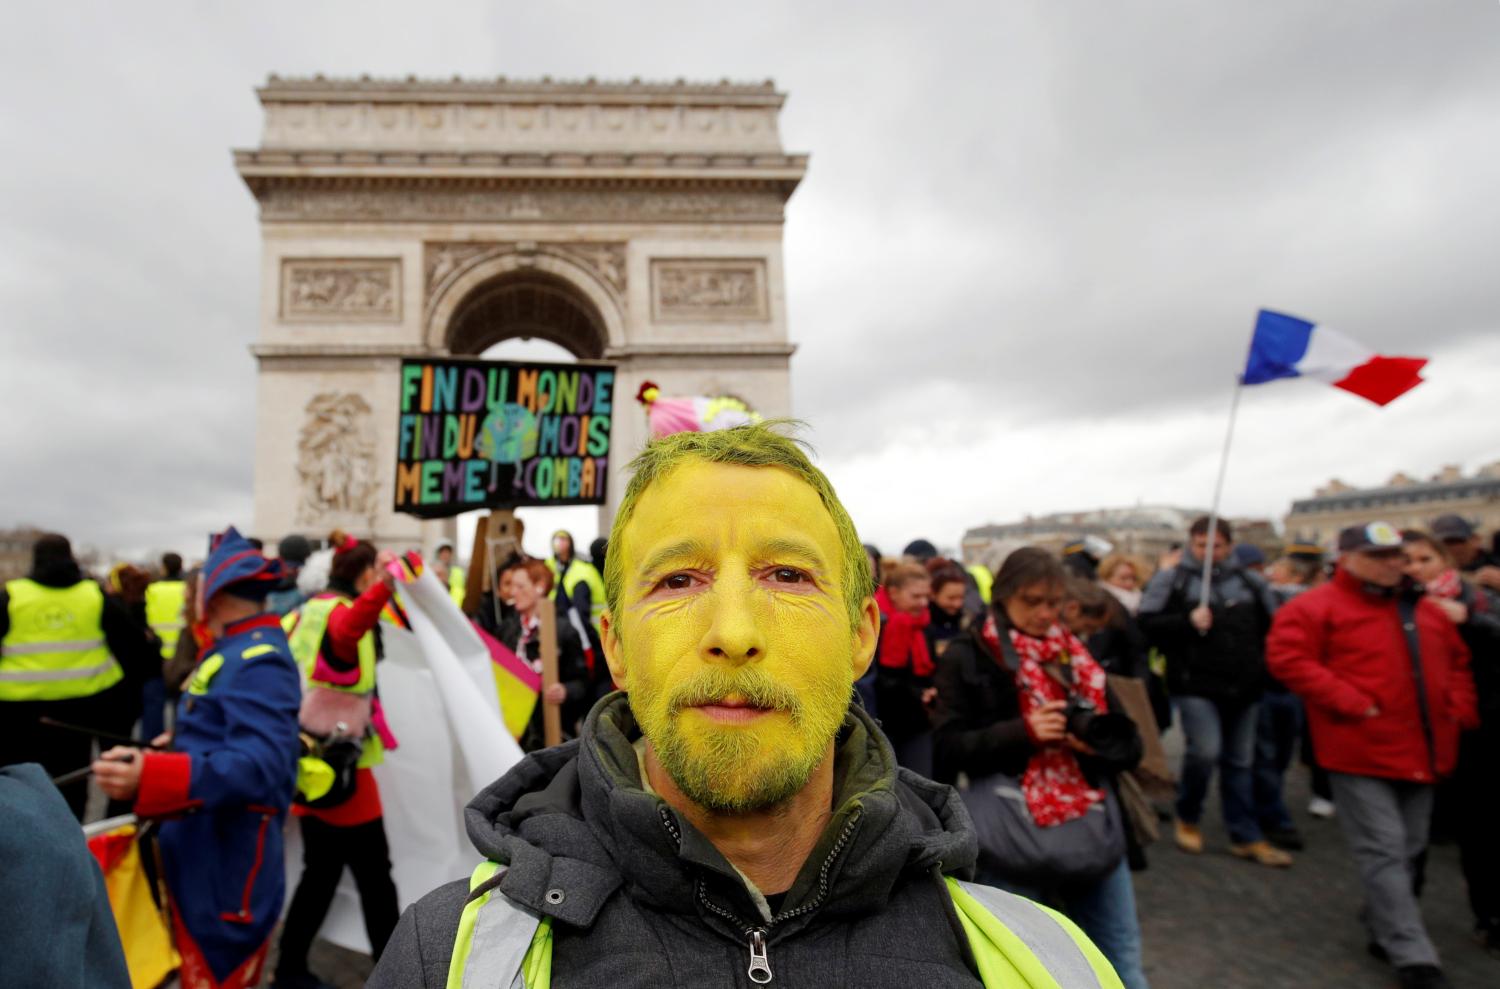 A protester wearing a yellow vest and with his face painted yellow walks down the Champs Elysees during a demonstration by the "yellow vests" movement in Paris, France, march 9, 2019.  REUTERS/Philippe Wojazer - RC1B5A4470C0